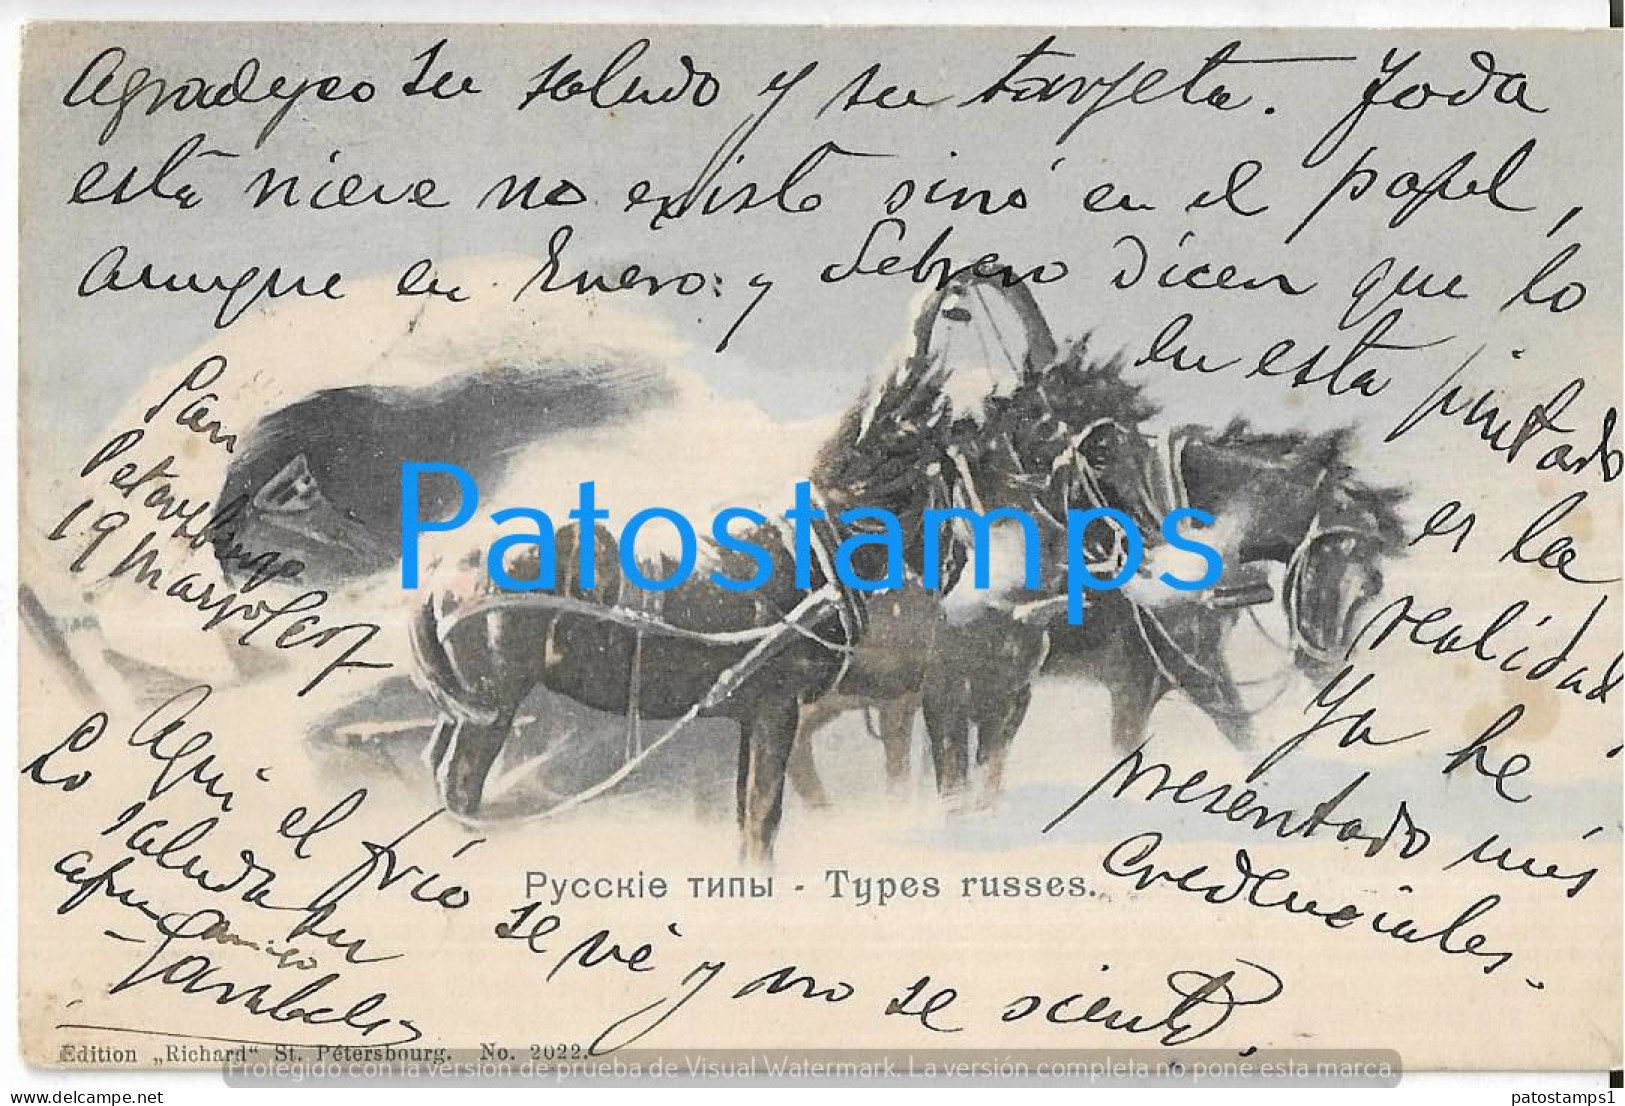 227644 RUSSIA COSTUMES MAN'S A HORSE SNOW CIRCULATED TO GERMANY POSTAL POSTCARD - Russia